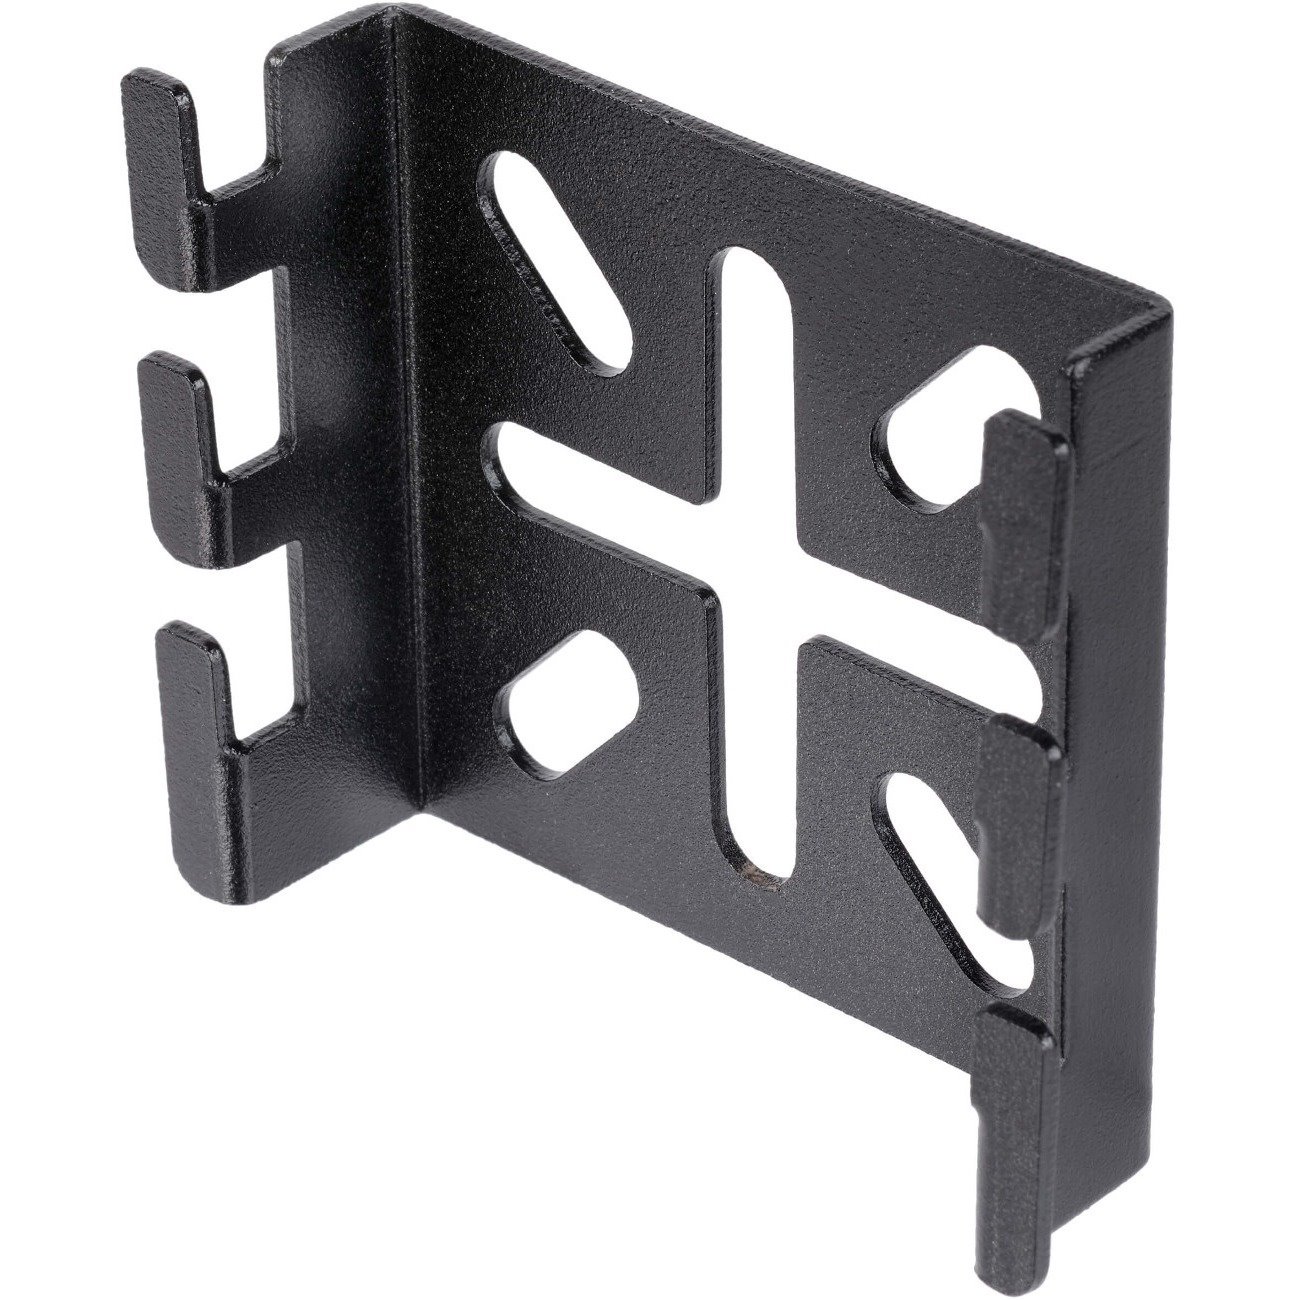 Tripp Lite by Eaton Wall/Floor Spider Bracket for Wire Mesh Cable Trays - Mounting Bracket for Cable Tray - Black